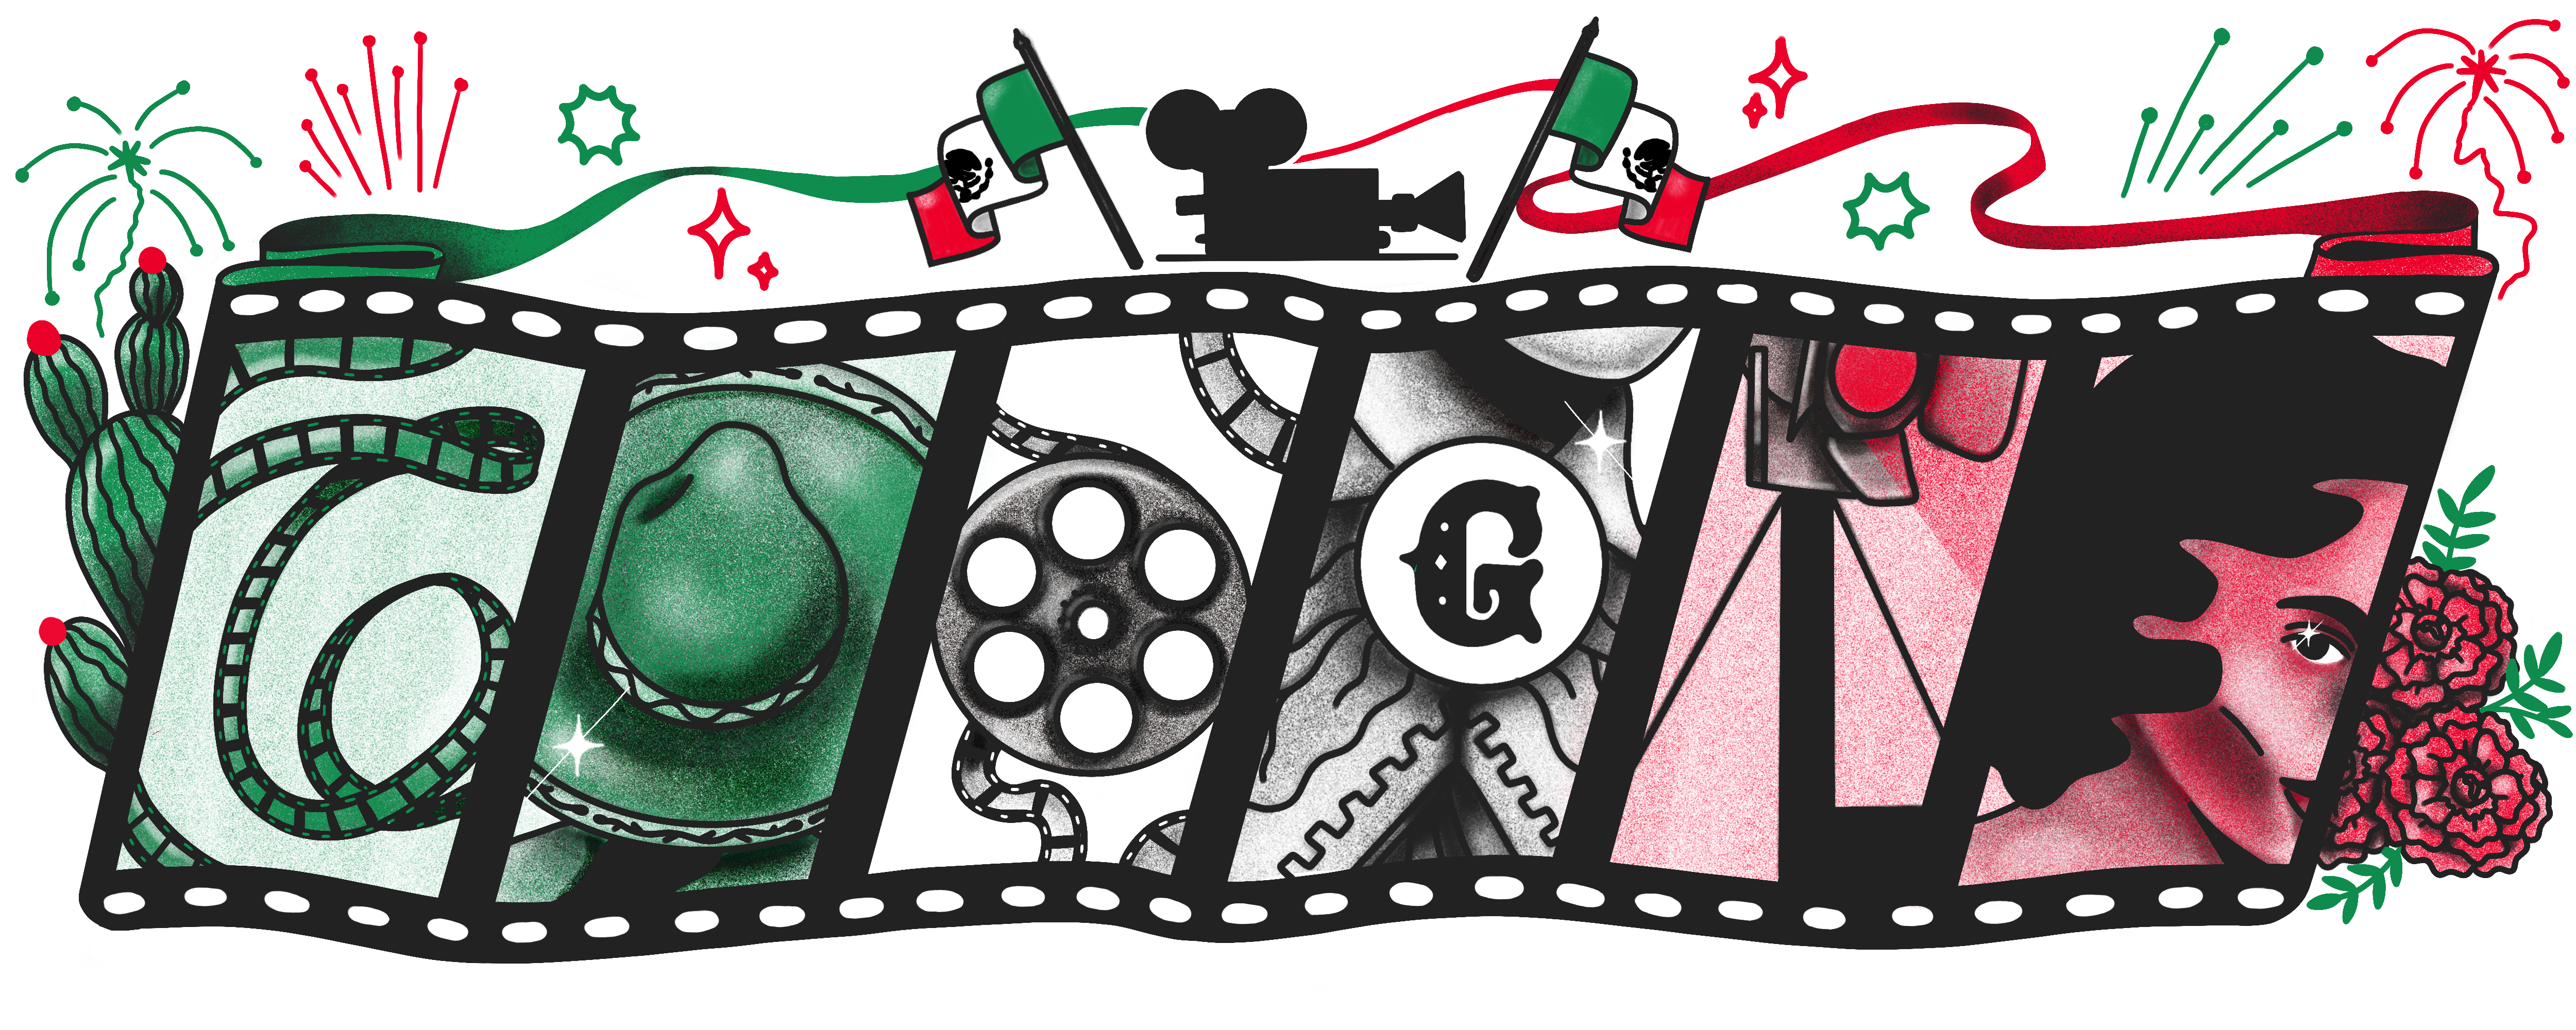 digital illustration of the Google logo in a film strip shape, with each frame representing a different letter. the G frame is green and has a strip of film in the shape of the G, the O is a green sombrero, the second O black film canister, the G is a bow on the neck of an individual, the L red and is the base of a spotlight, and the final e is represented by the hairline of a woman with black hair. The border of the film strip is decorated with cacti, flowers, fireworks, two Mexican flags, and a film camera. 